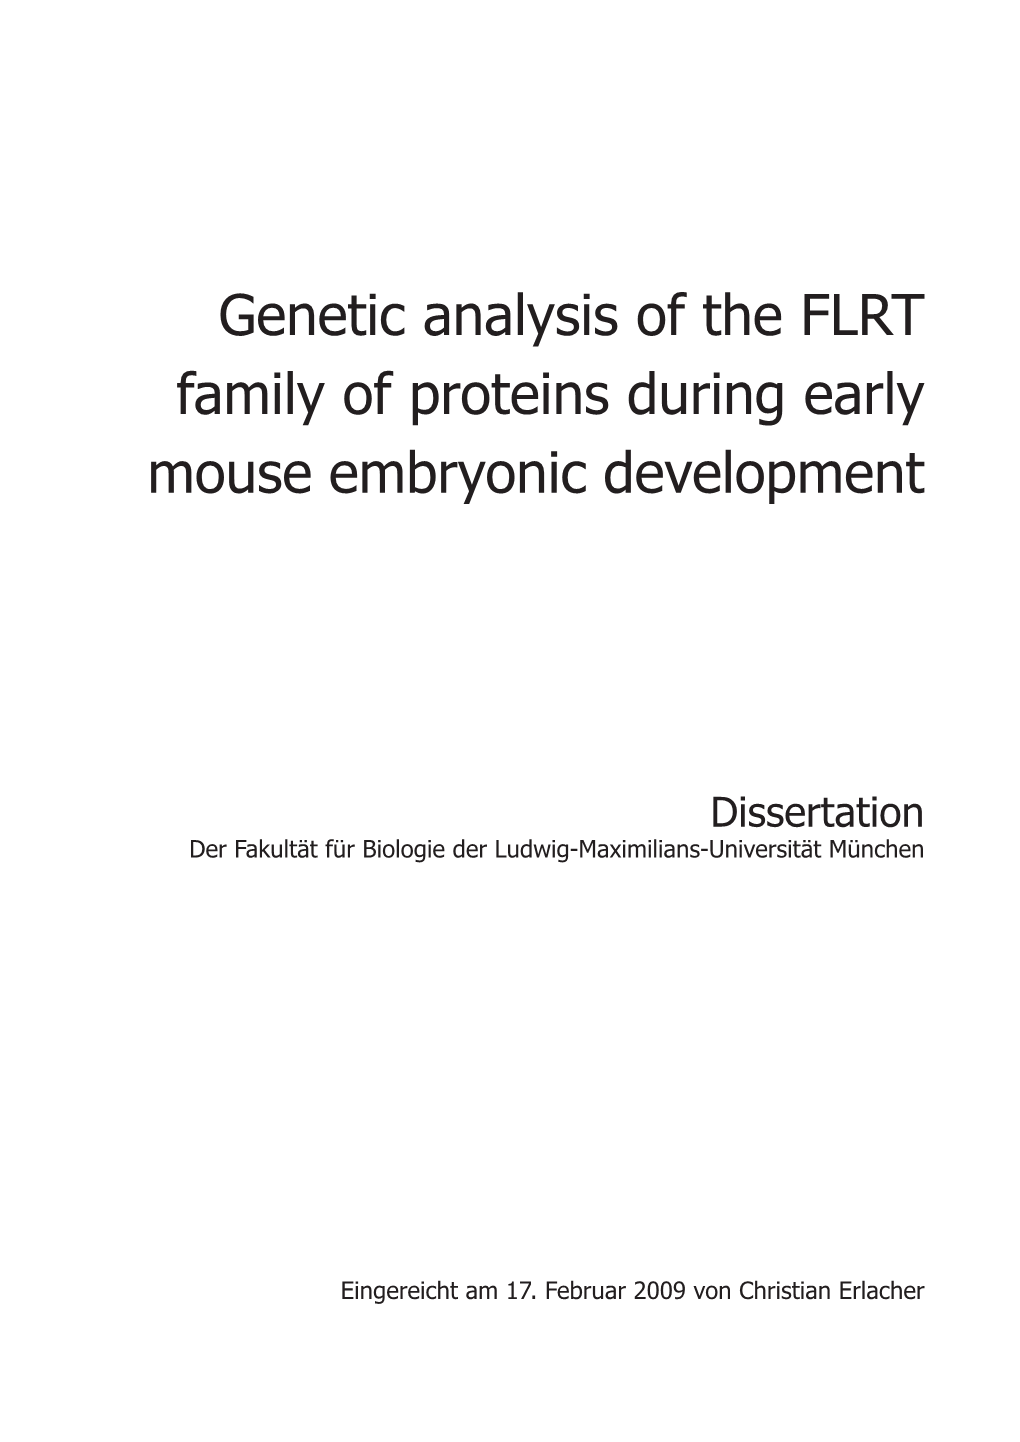 Genetic Analysis of FLRT Protein Family During Early Mouse Embryonic Development